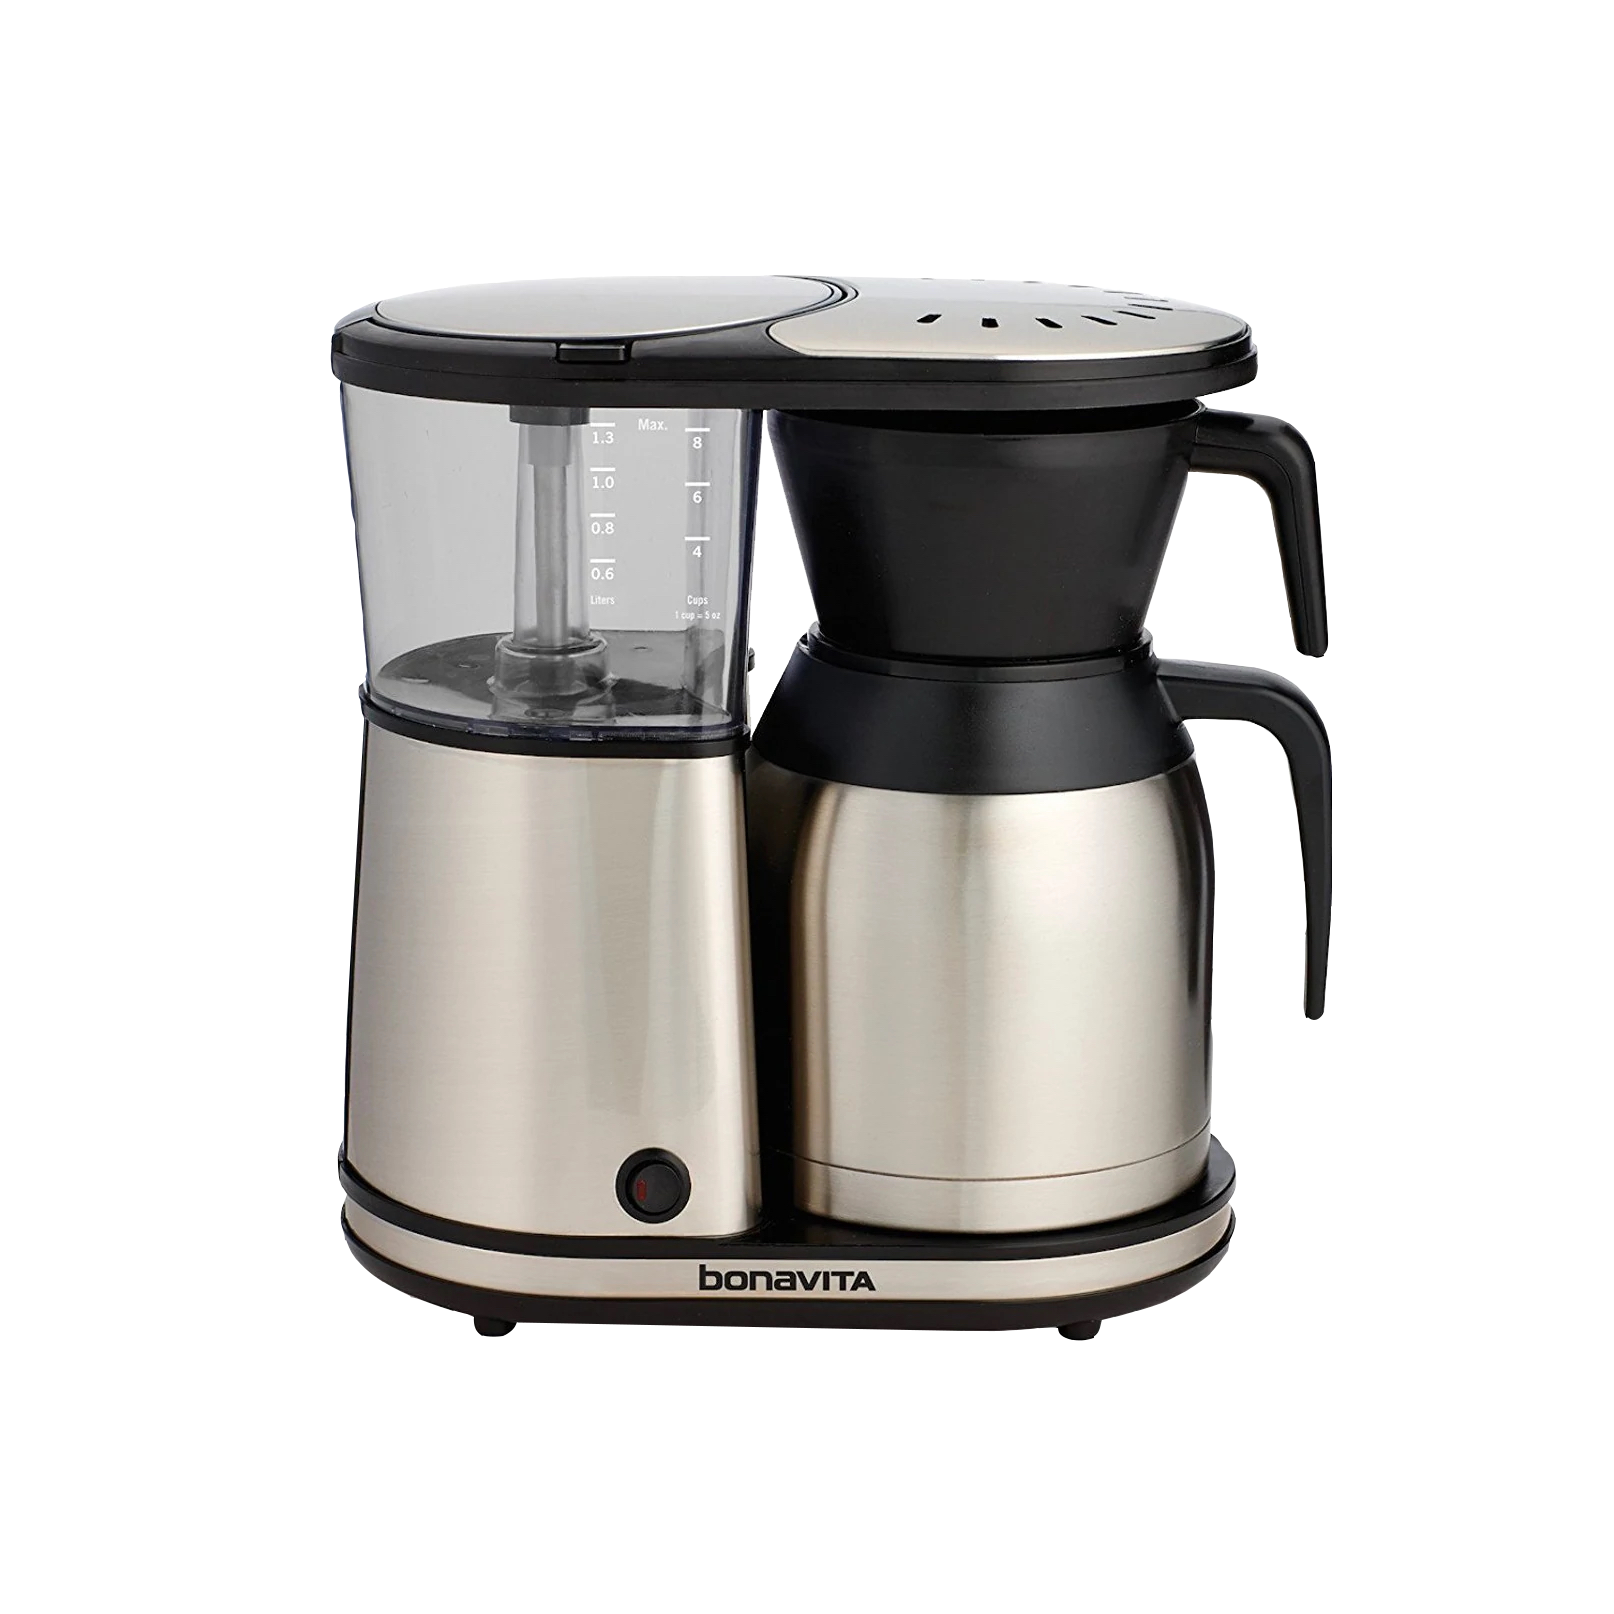 8-Cup Stainless Steel Classic Stovetop Coffee Percolator 